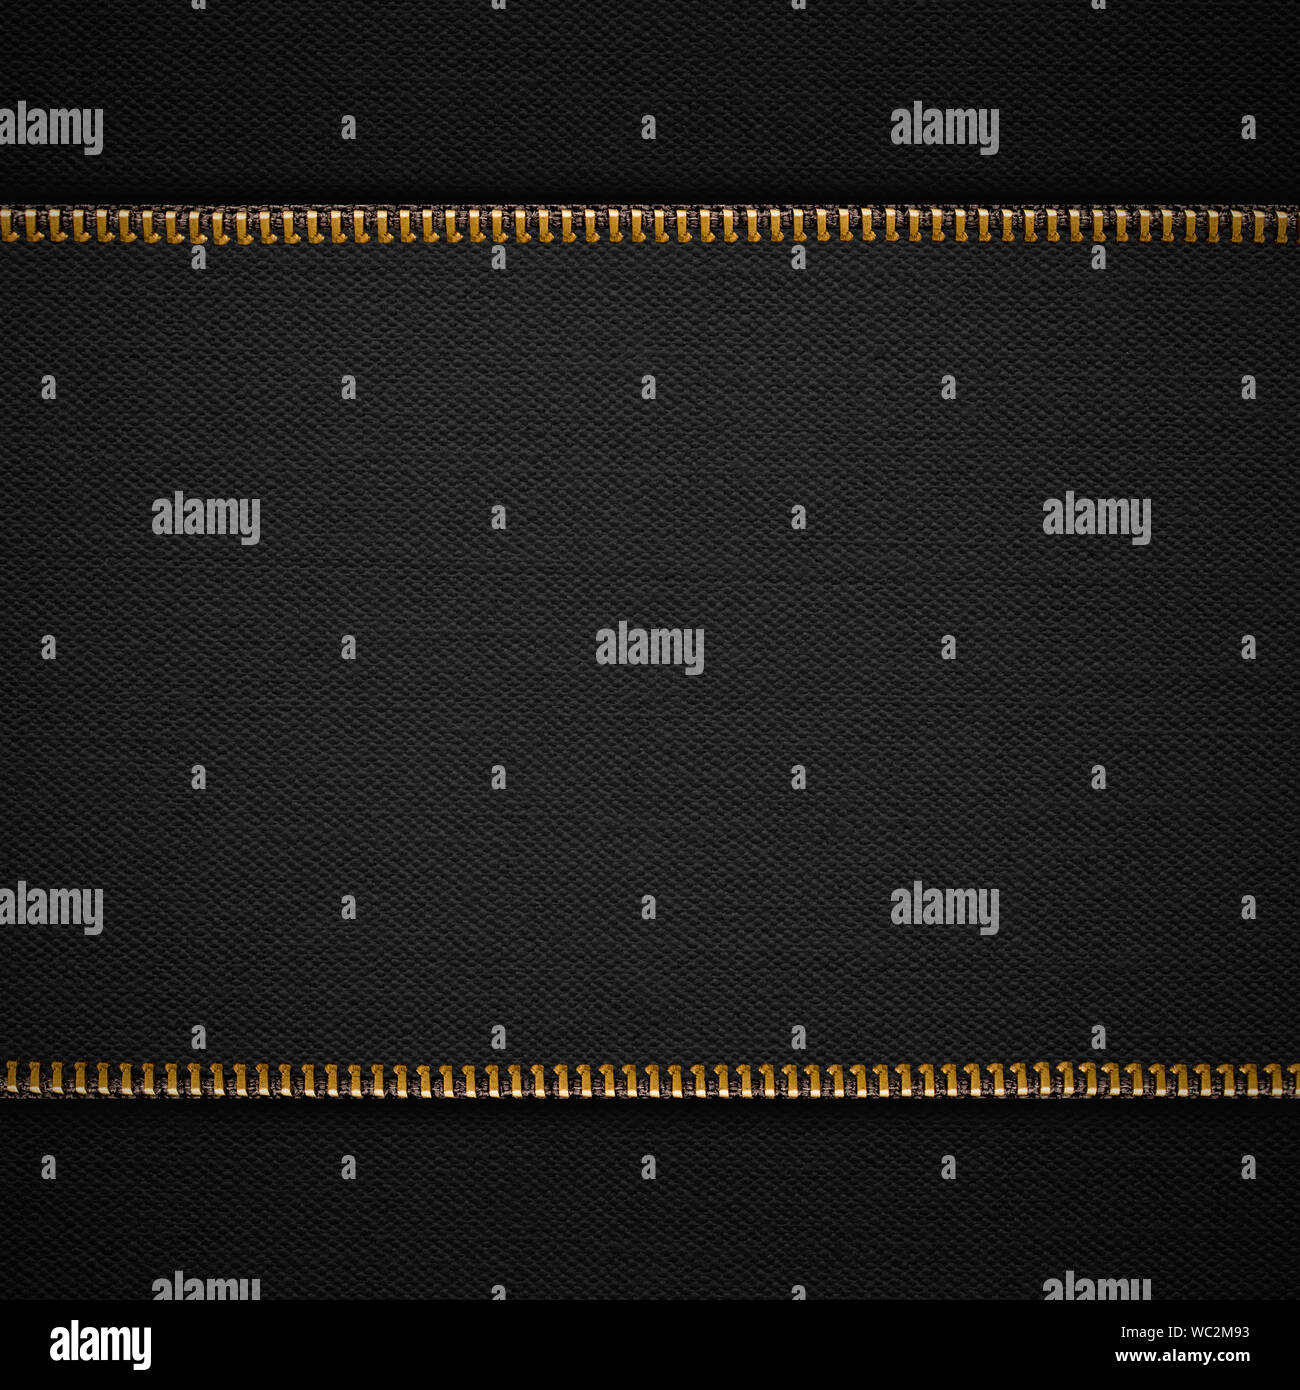 black abstract background or cloth grid pattern texture with gold zips Stock Photo